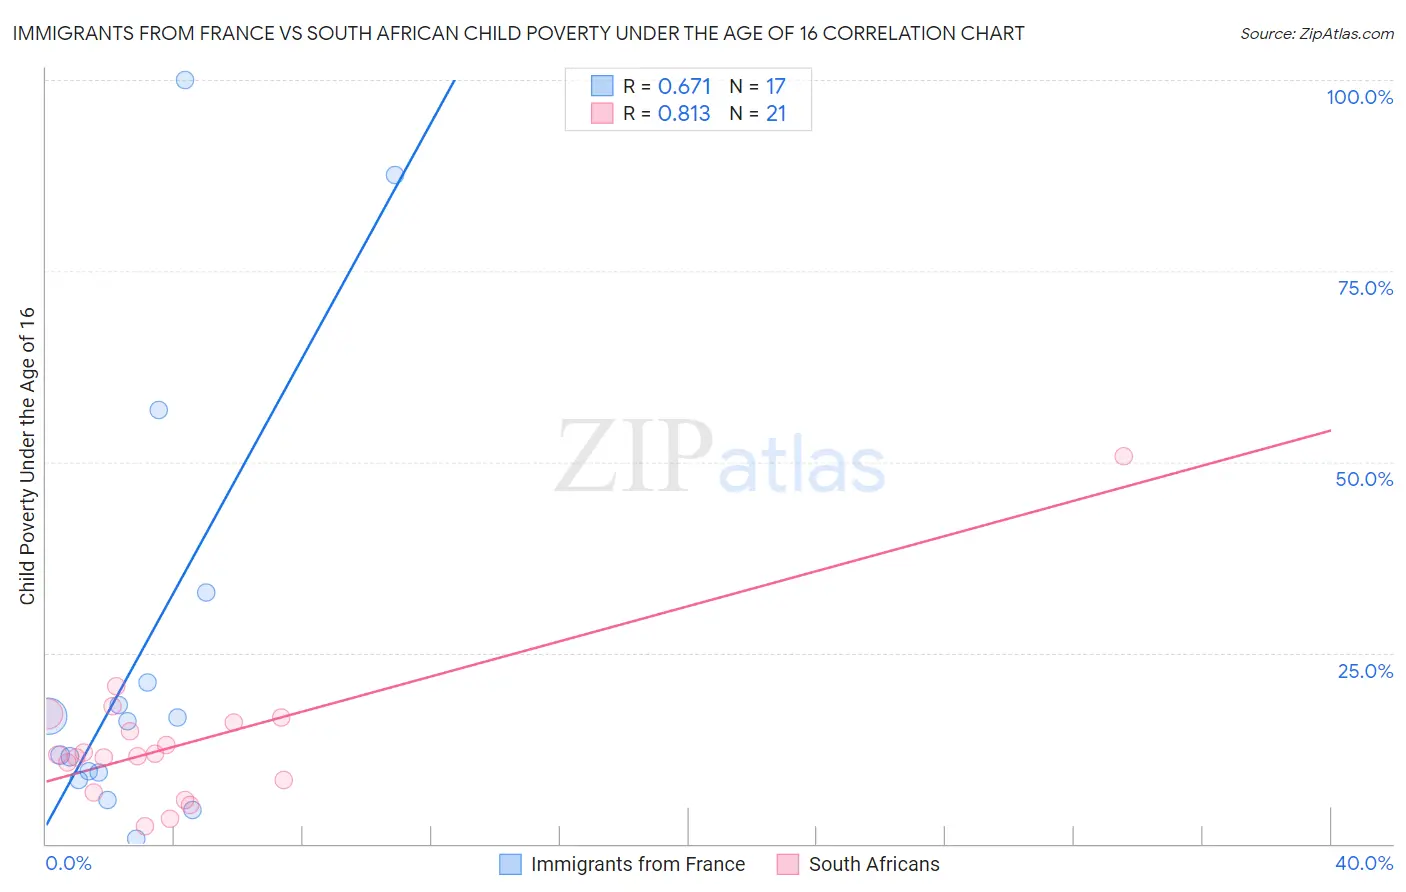 Immigrants from France vs South African Child Poverty Under the Age of 16